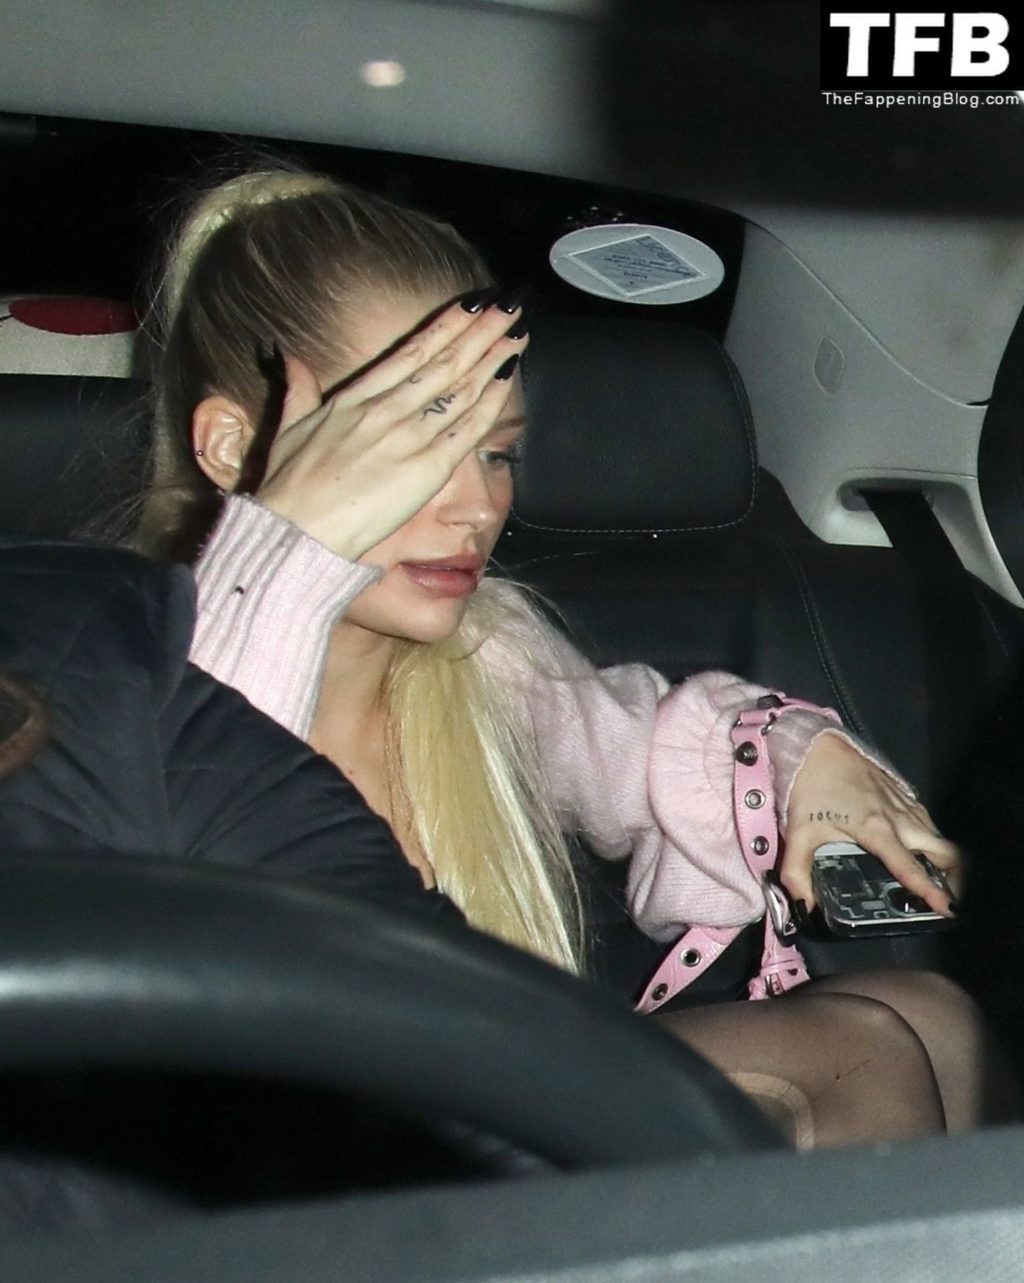 Lottie Moss and a Mystery Man are Seen Leaving The Chiltern Firehouse in London (34 Photos)